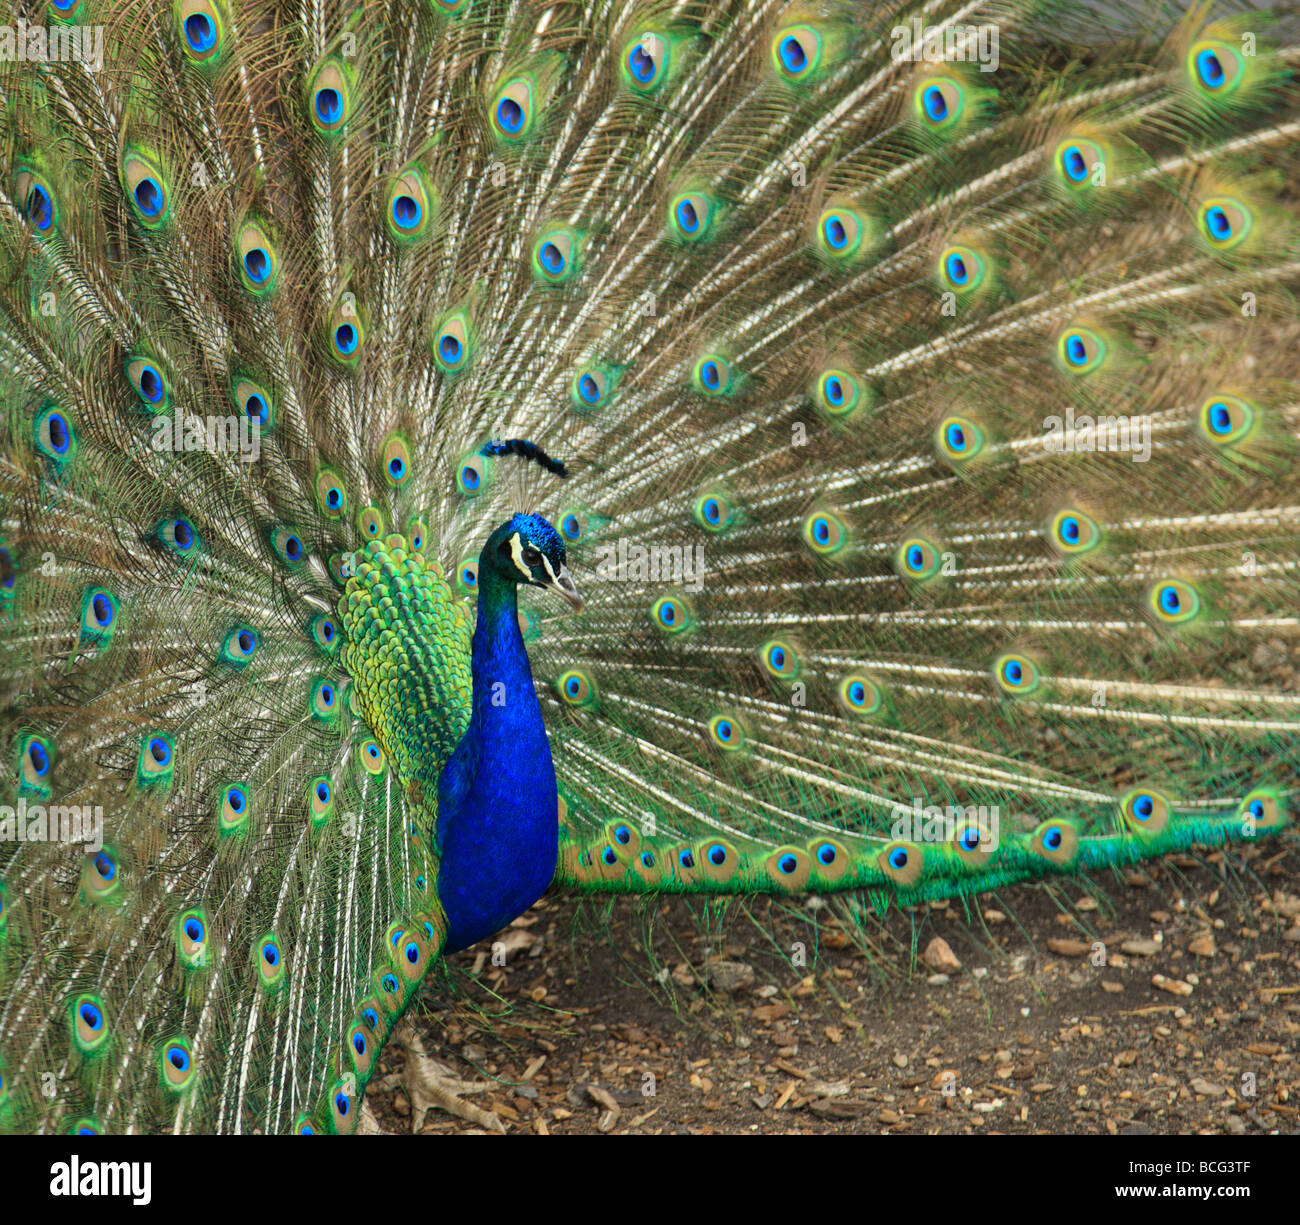 Peacock. Banque D'Images